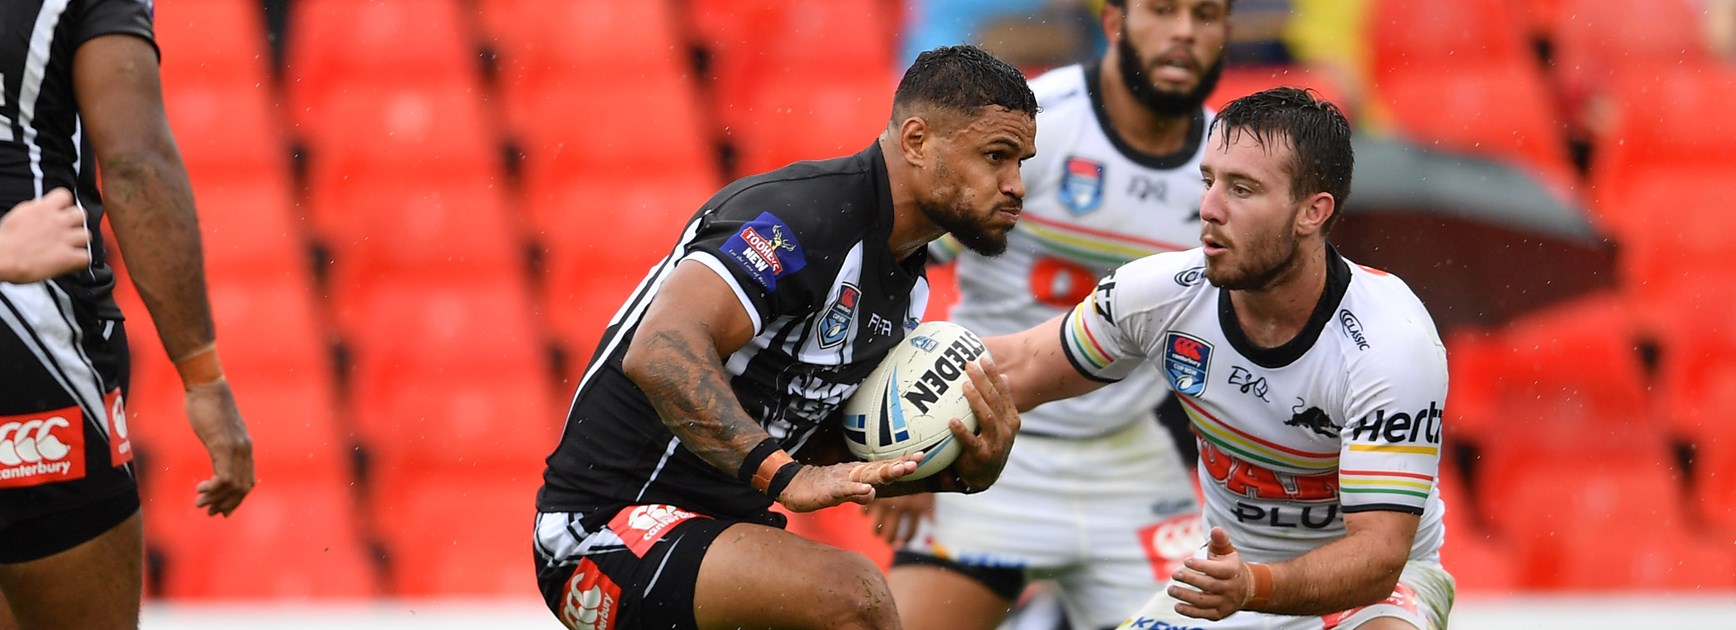 Magpies fall short to Panthers